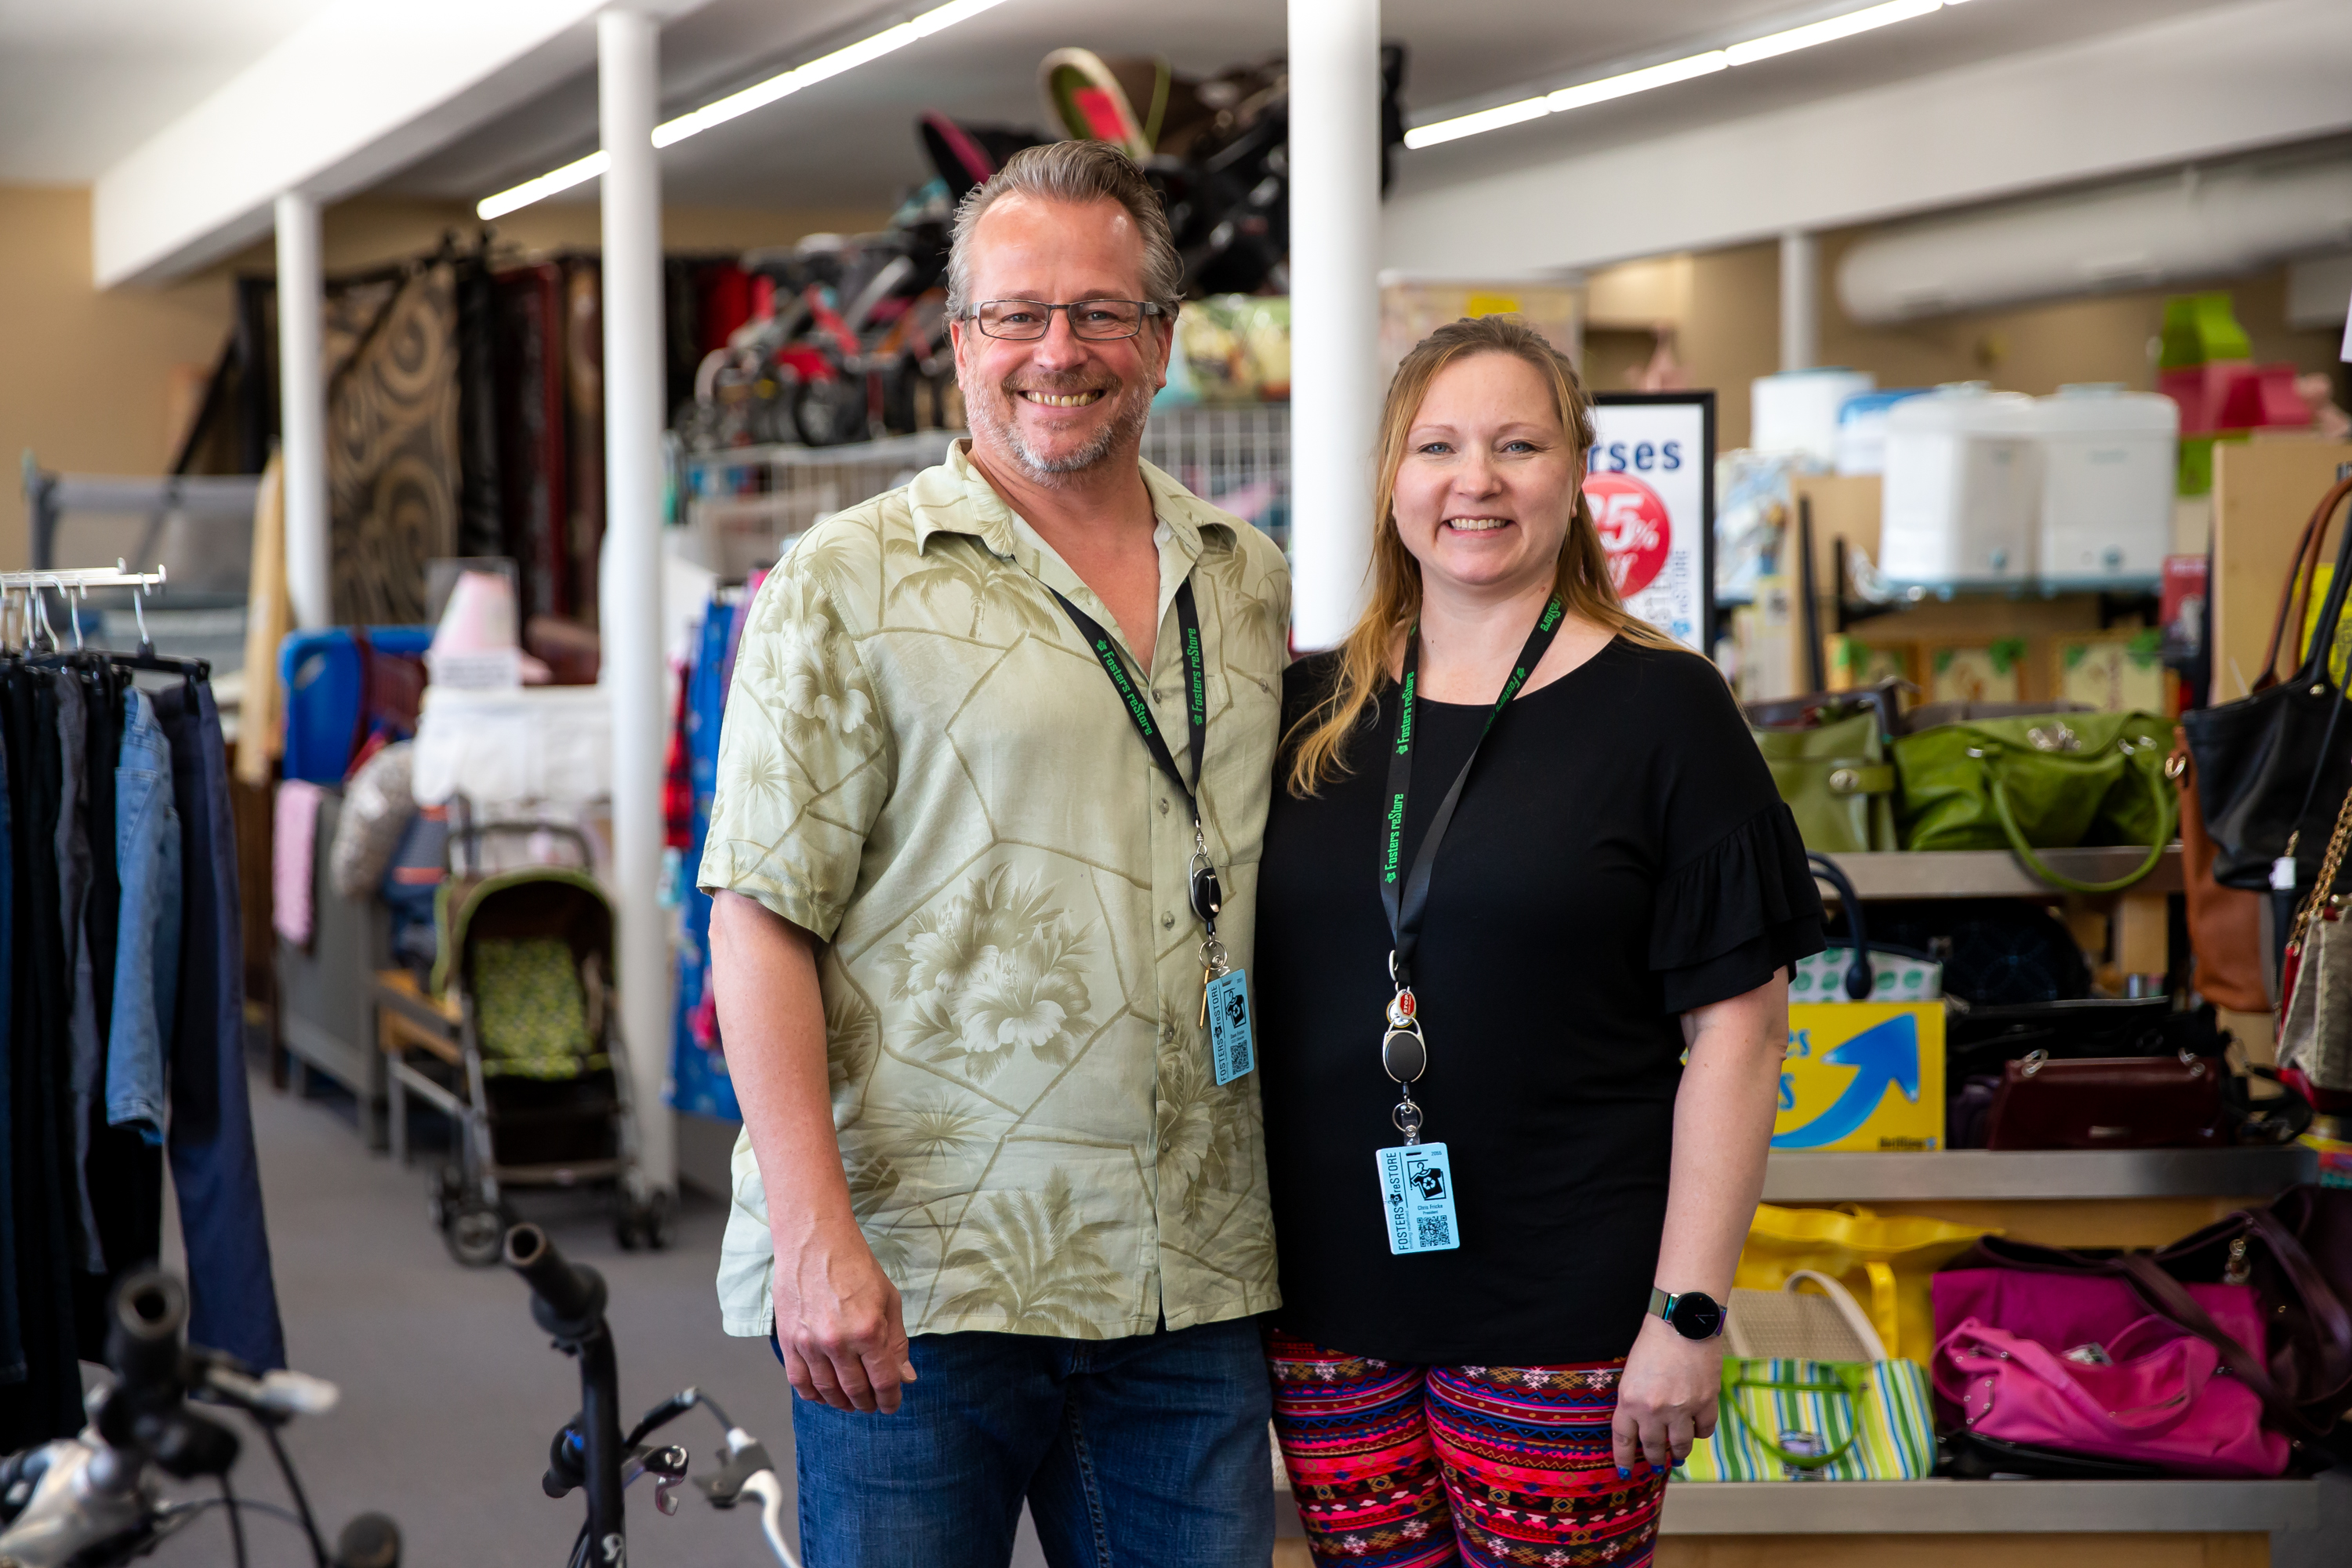 This Wish Local Store Provides Comfort and Normalcy to Foster Children